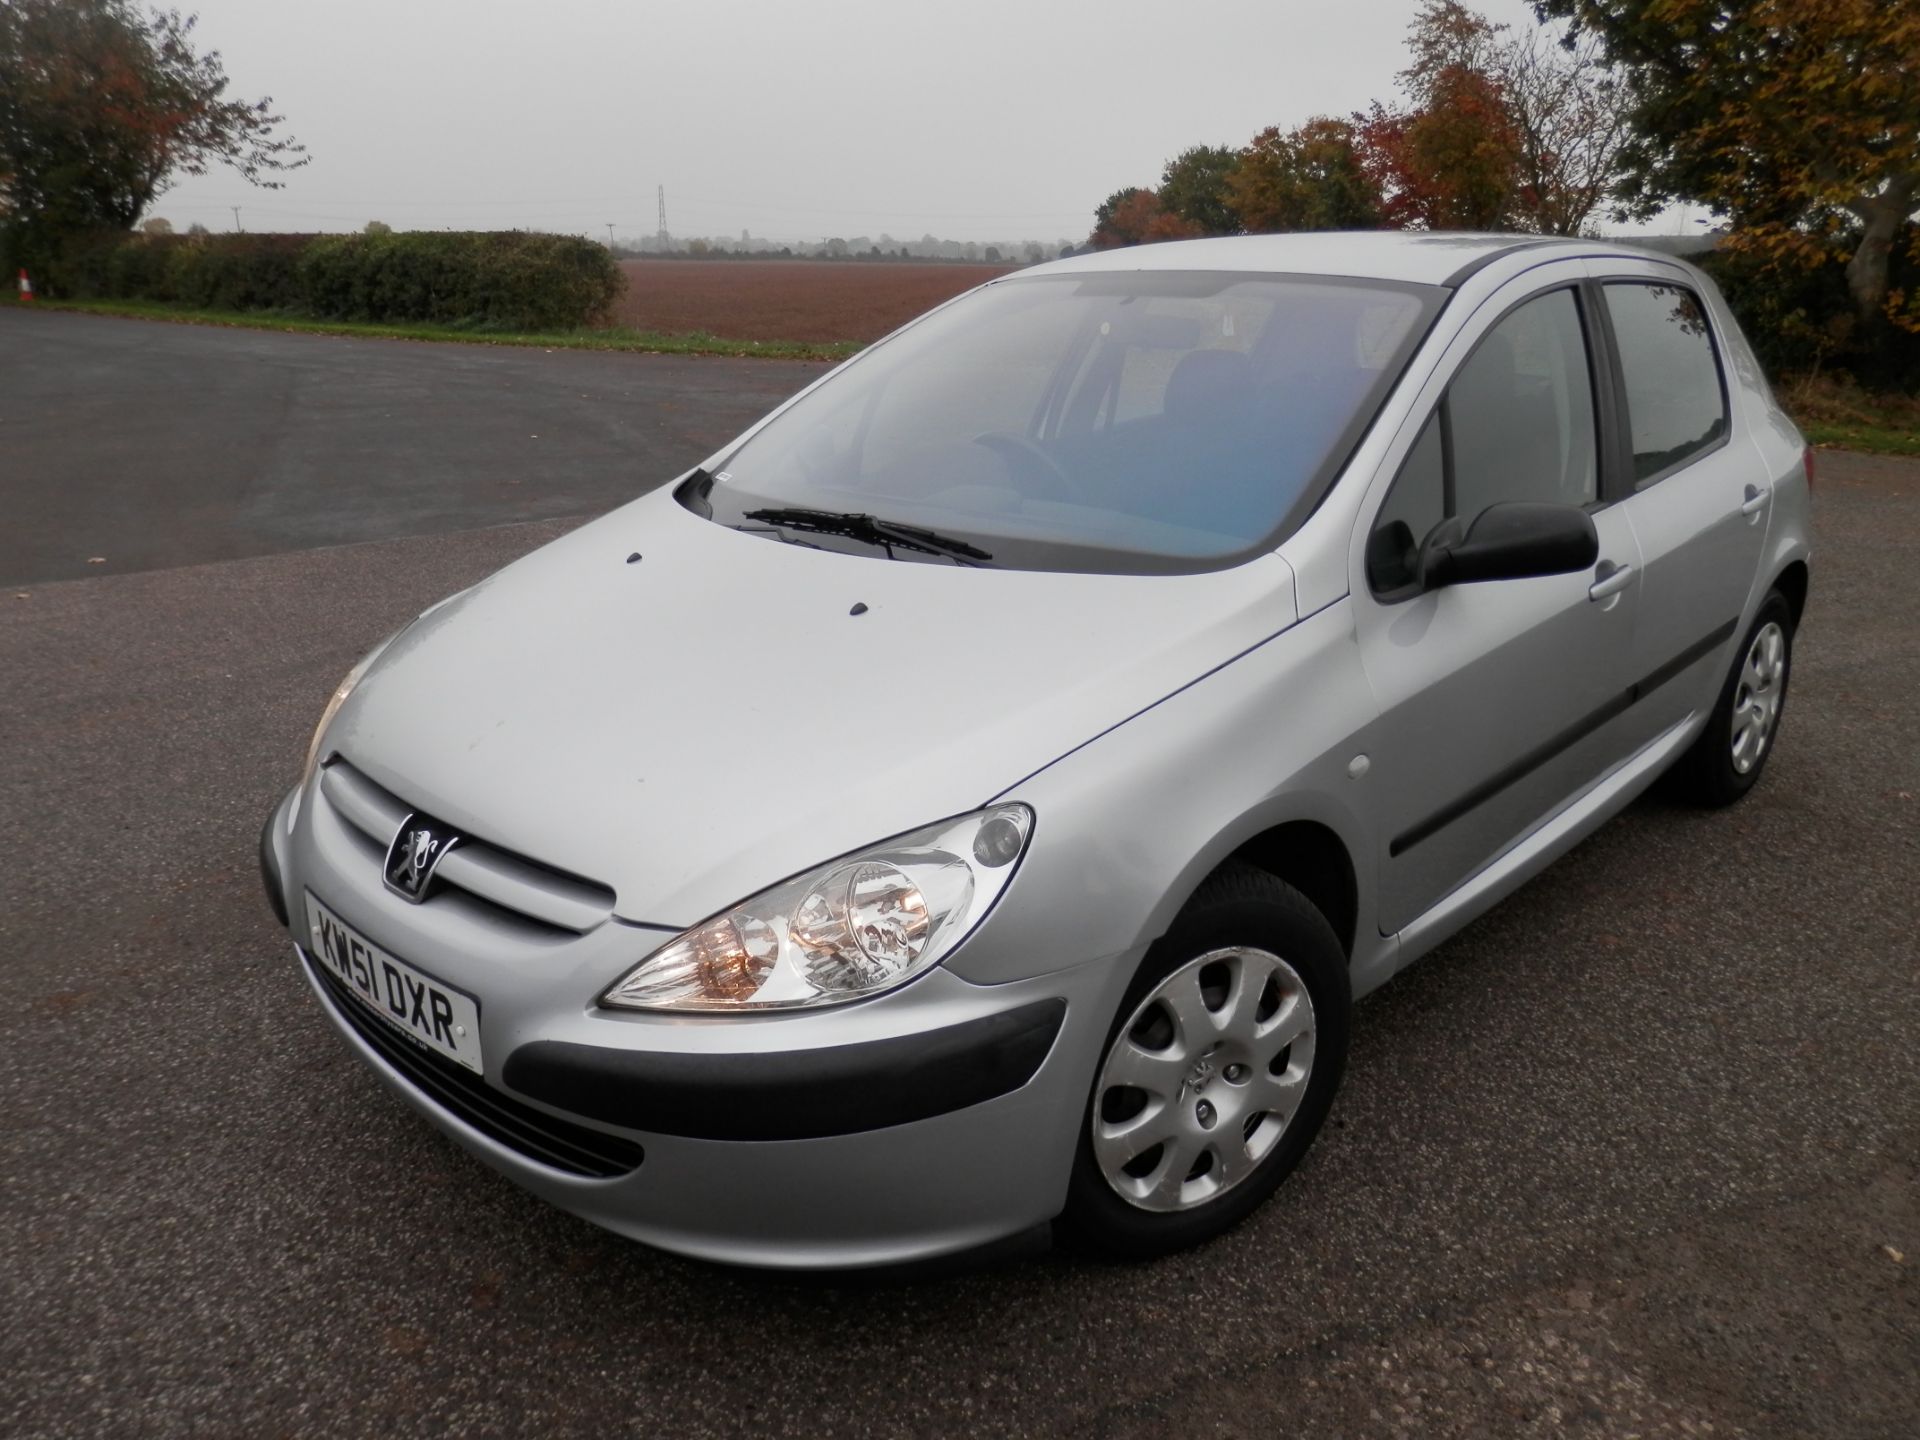 2002/51 PLATE PEUGEOT 307 1.6 LX AUTOMATIC, ONLY 51K WARRANTED MILES & MOT MAY 2017, GREAT CAR.